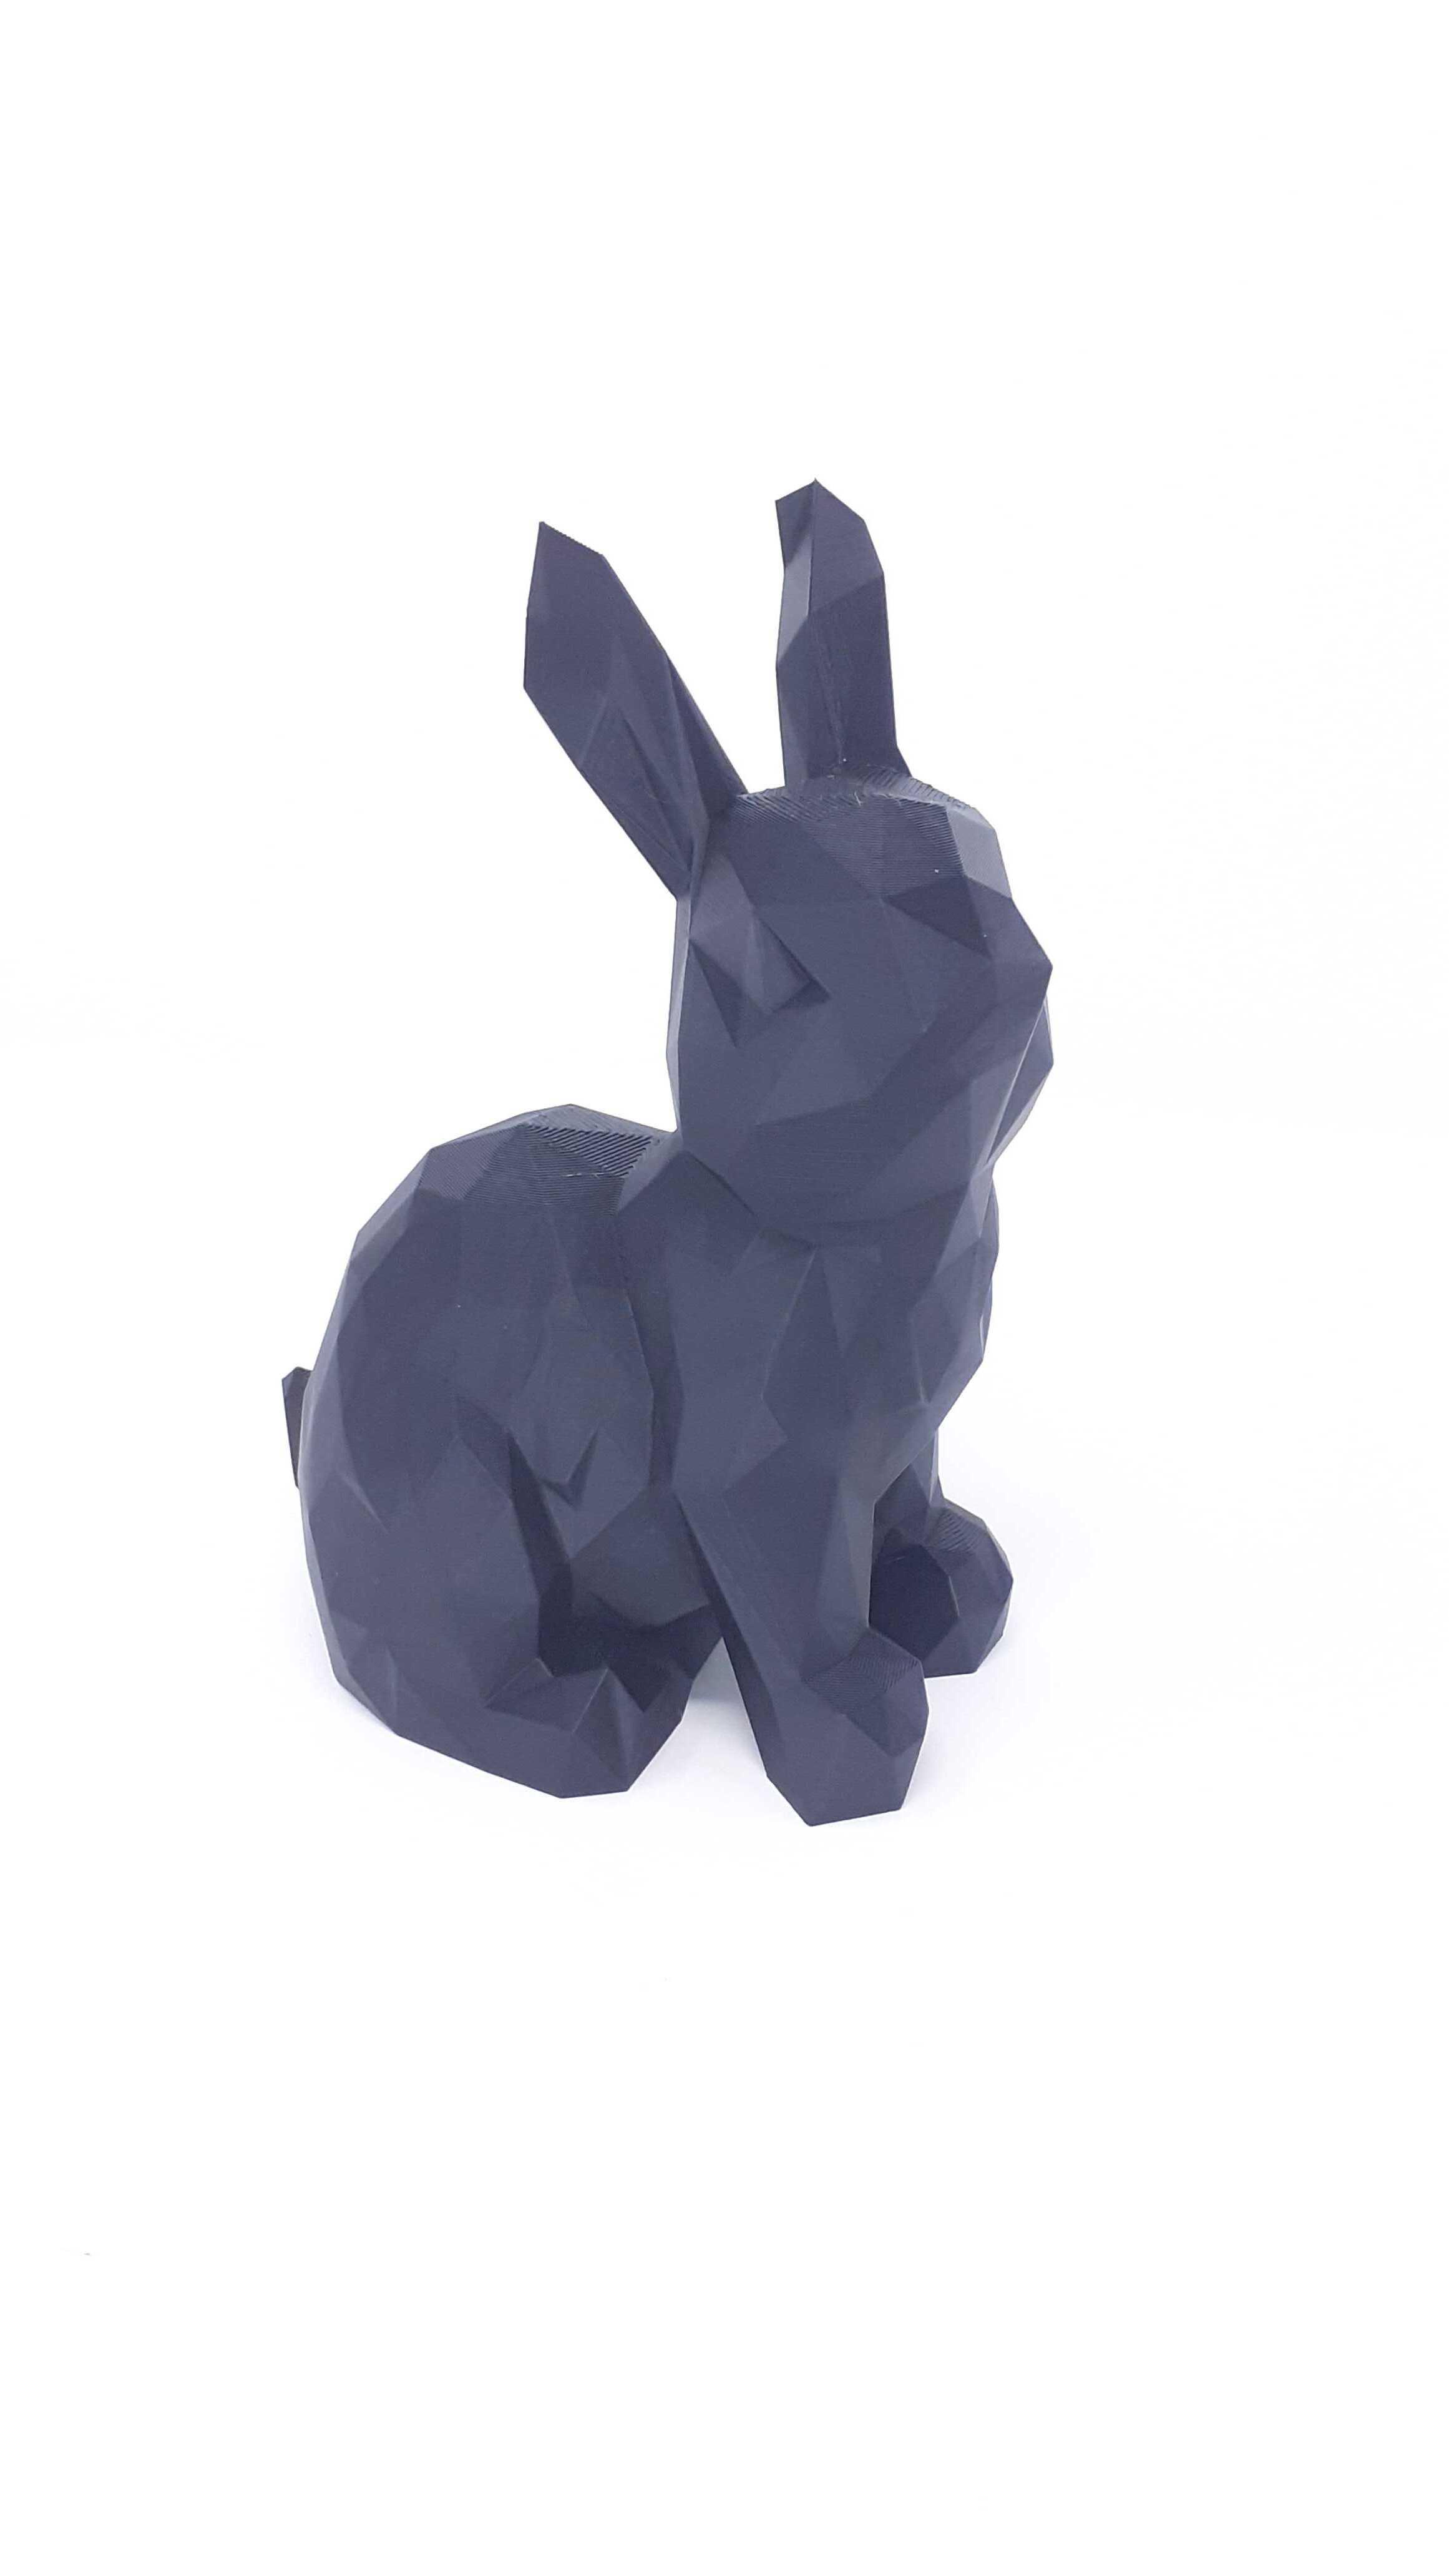 Bunny-shaped Piggy Bank - No supports 3d model